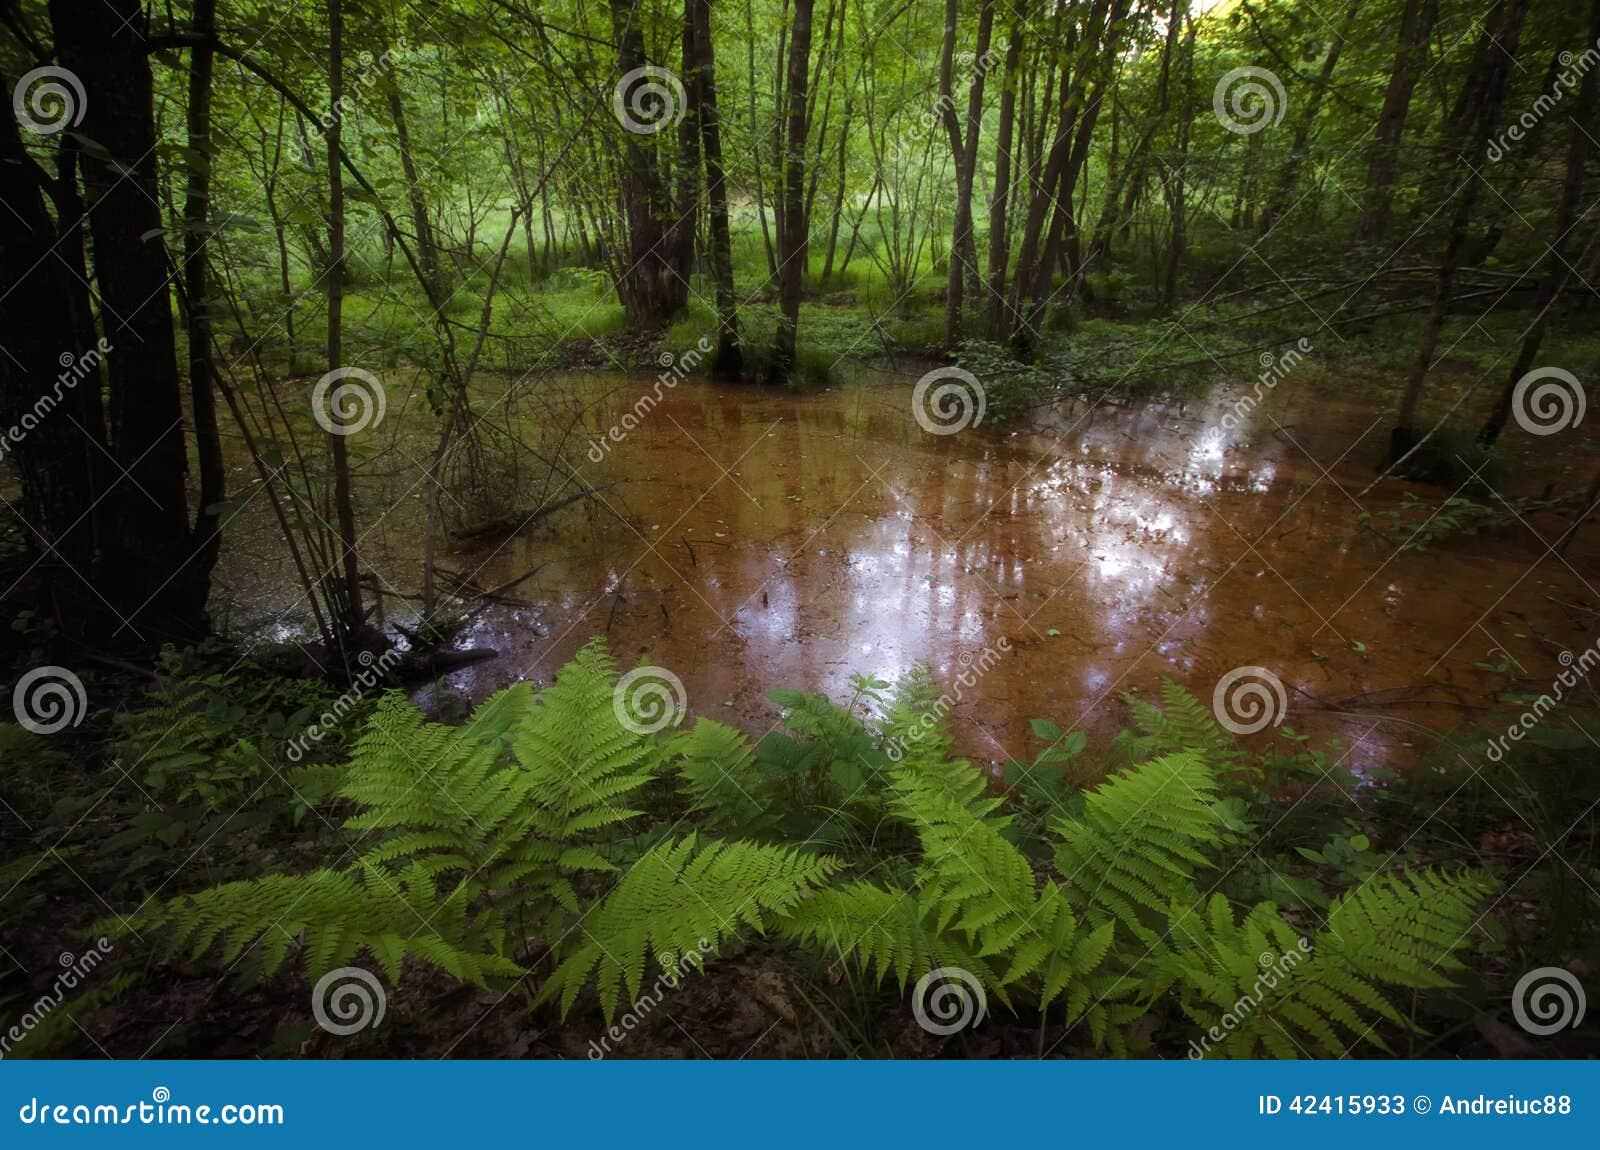 swamp in forest with vegetation